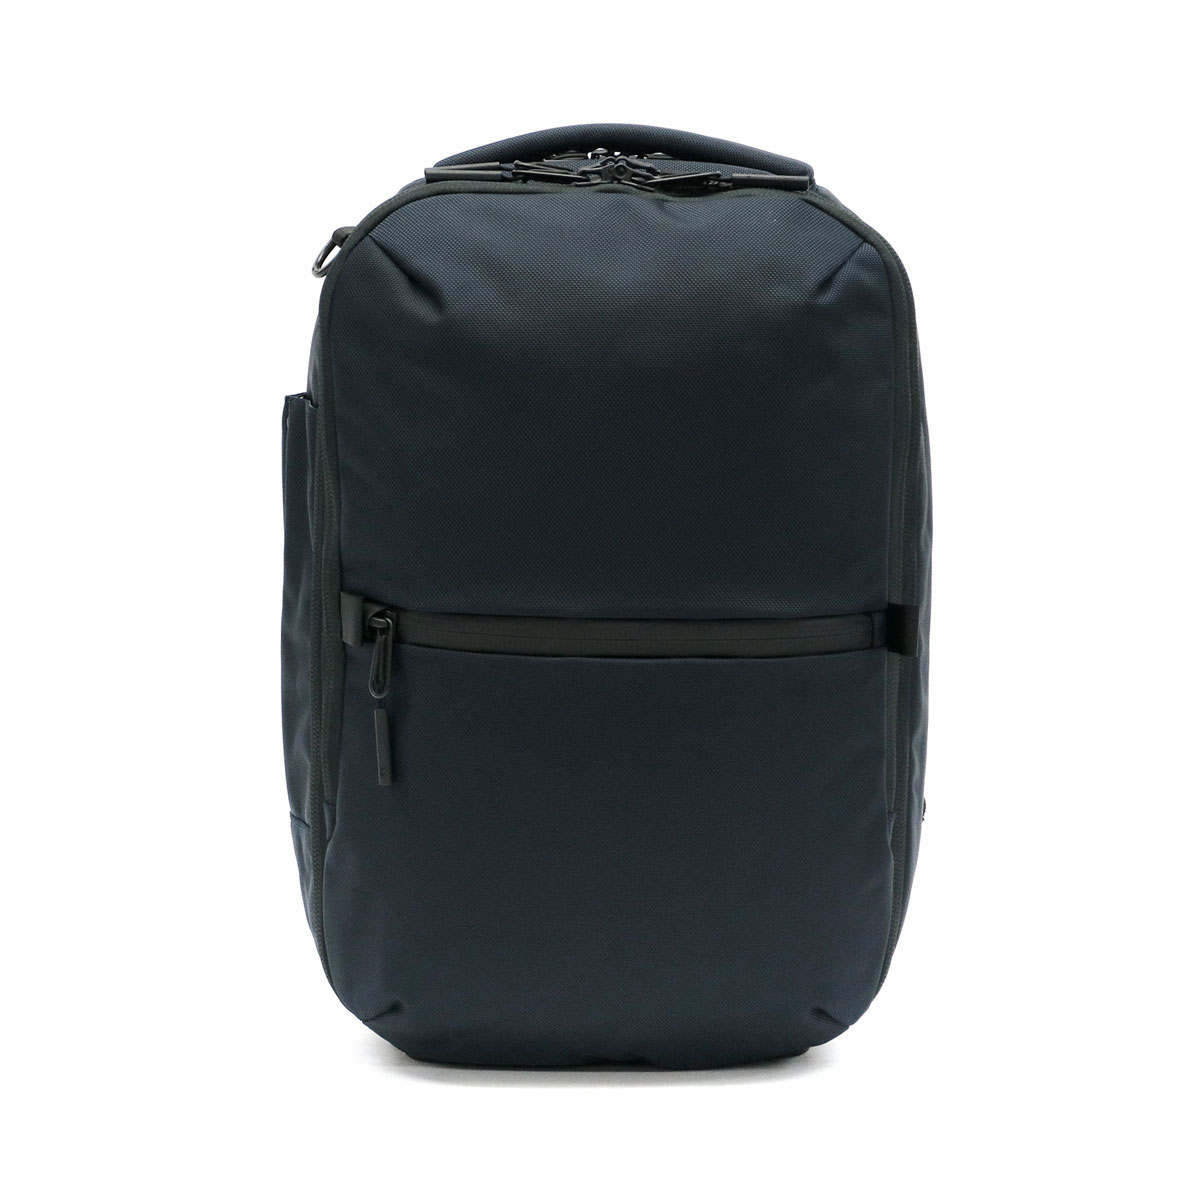 Aer エアー Travel Pack 2 Small バックパック 28L｜【正規販売店